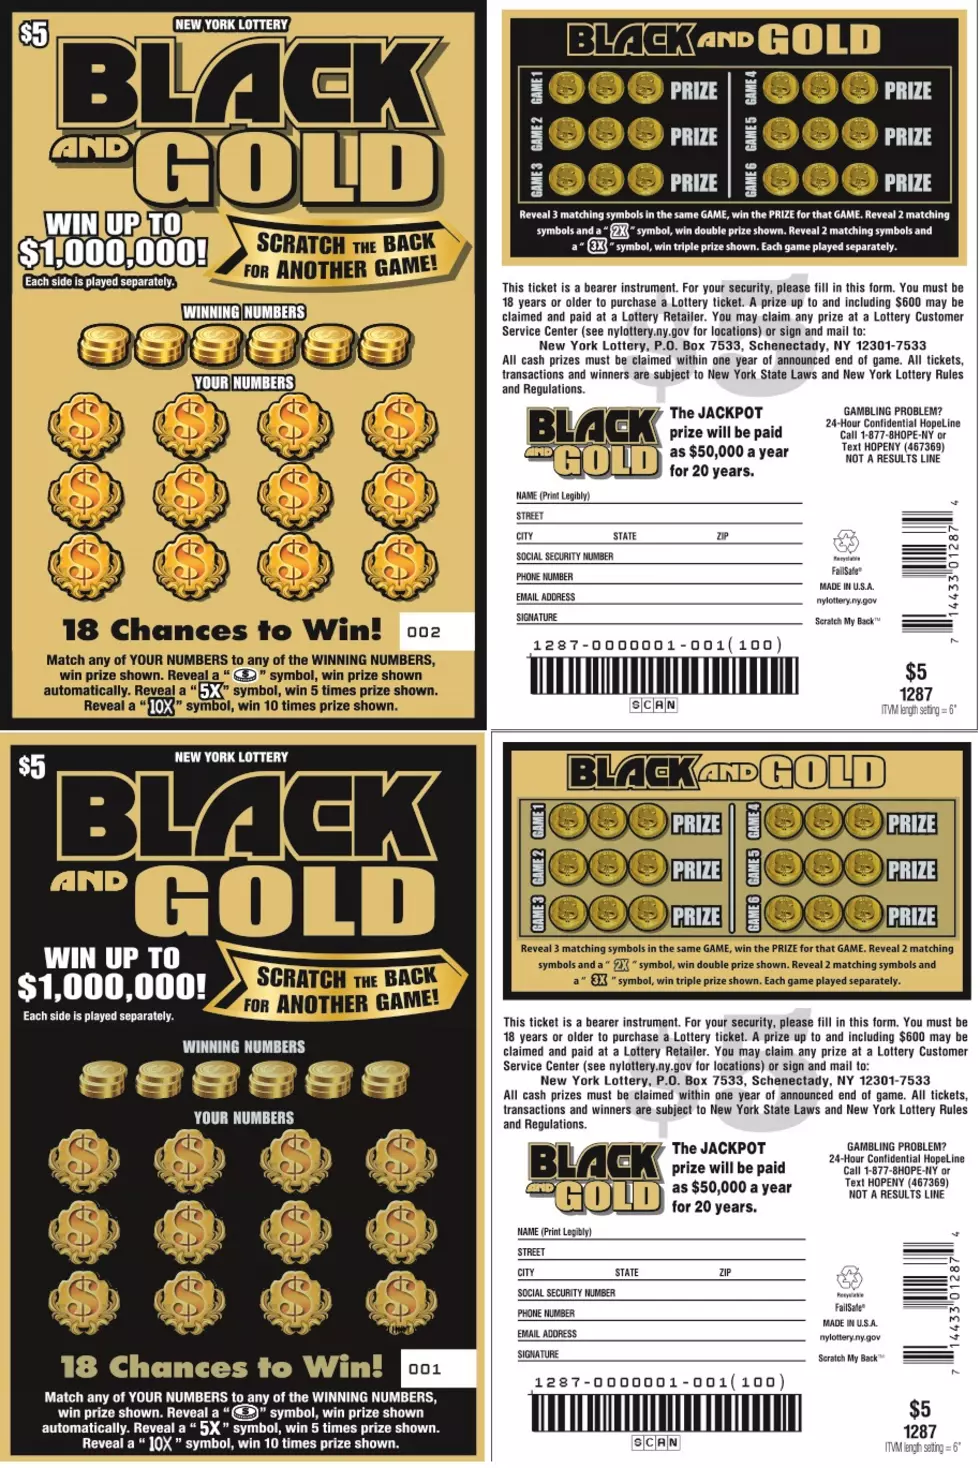 New York Lottery’s Black and Gold Official Contest Rules